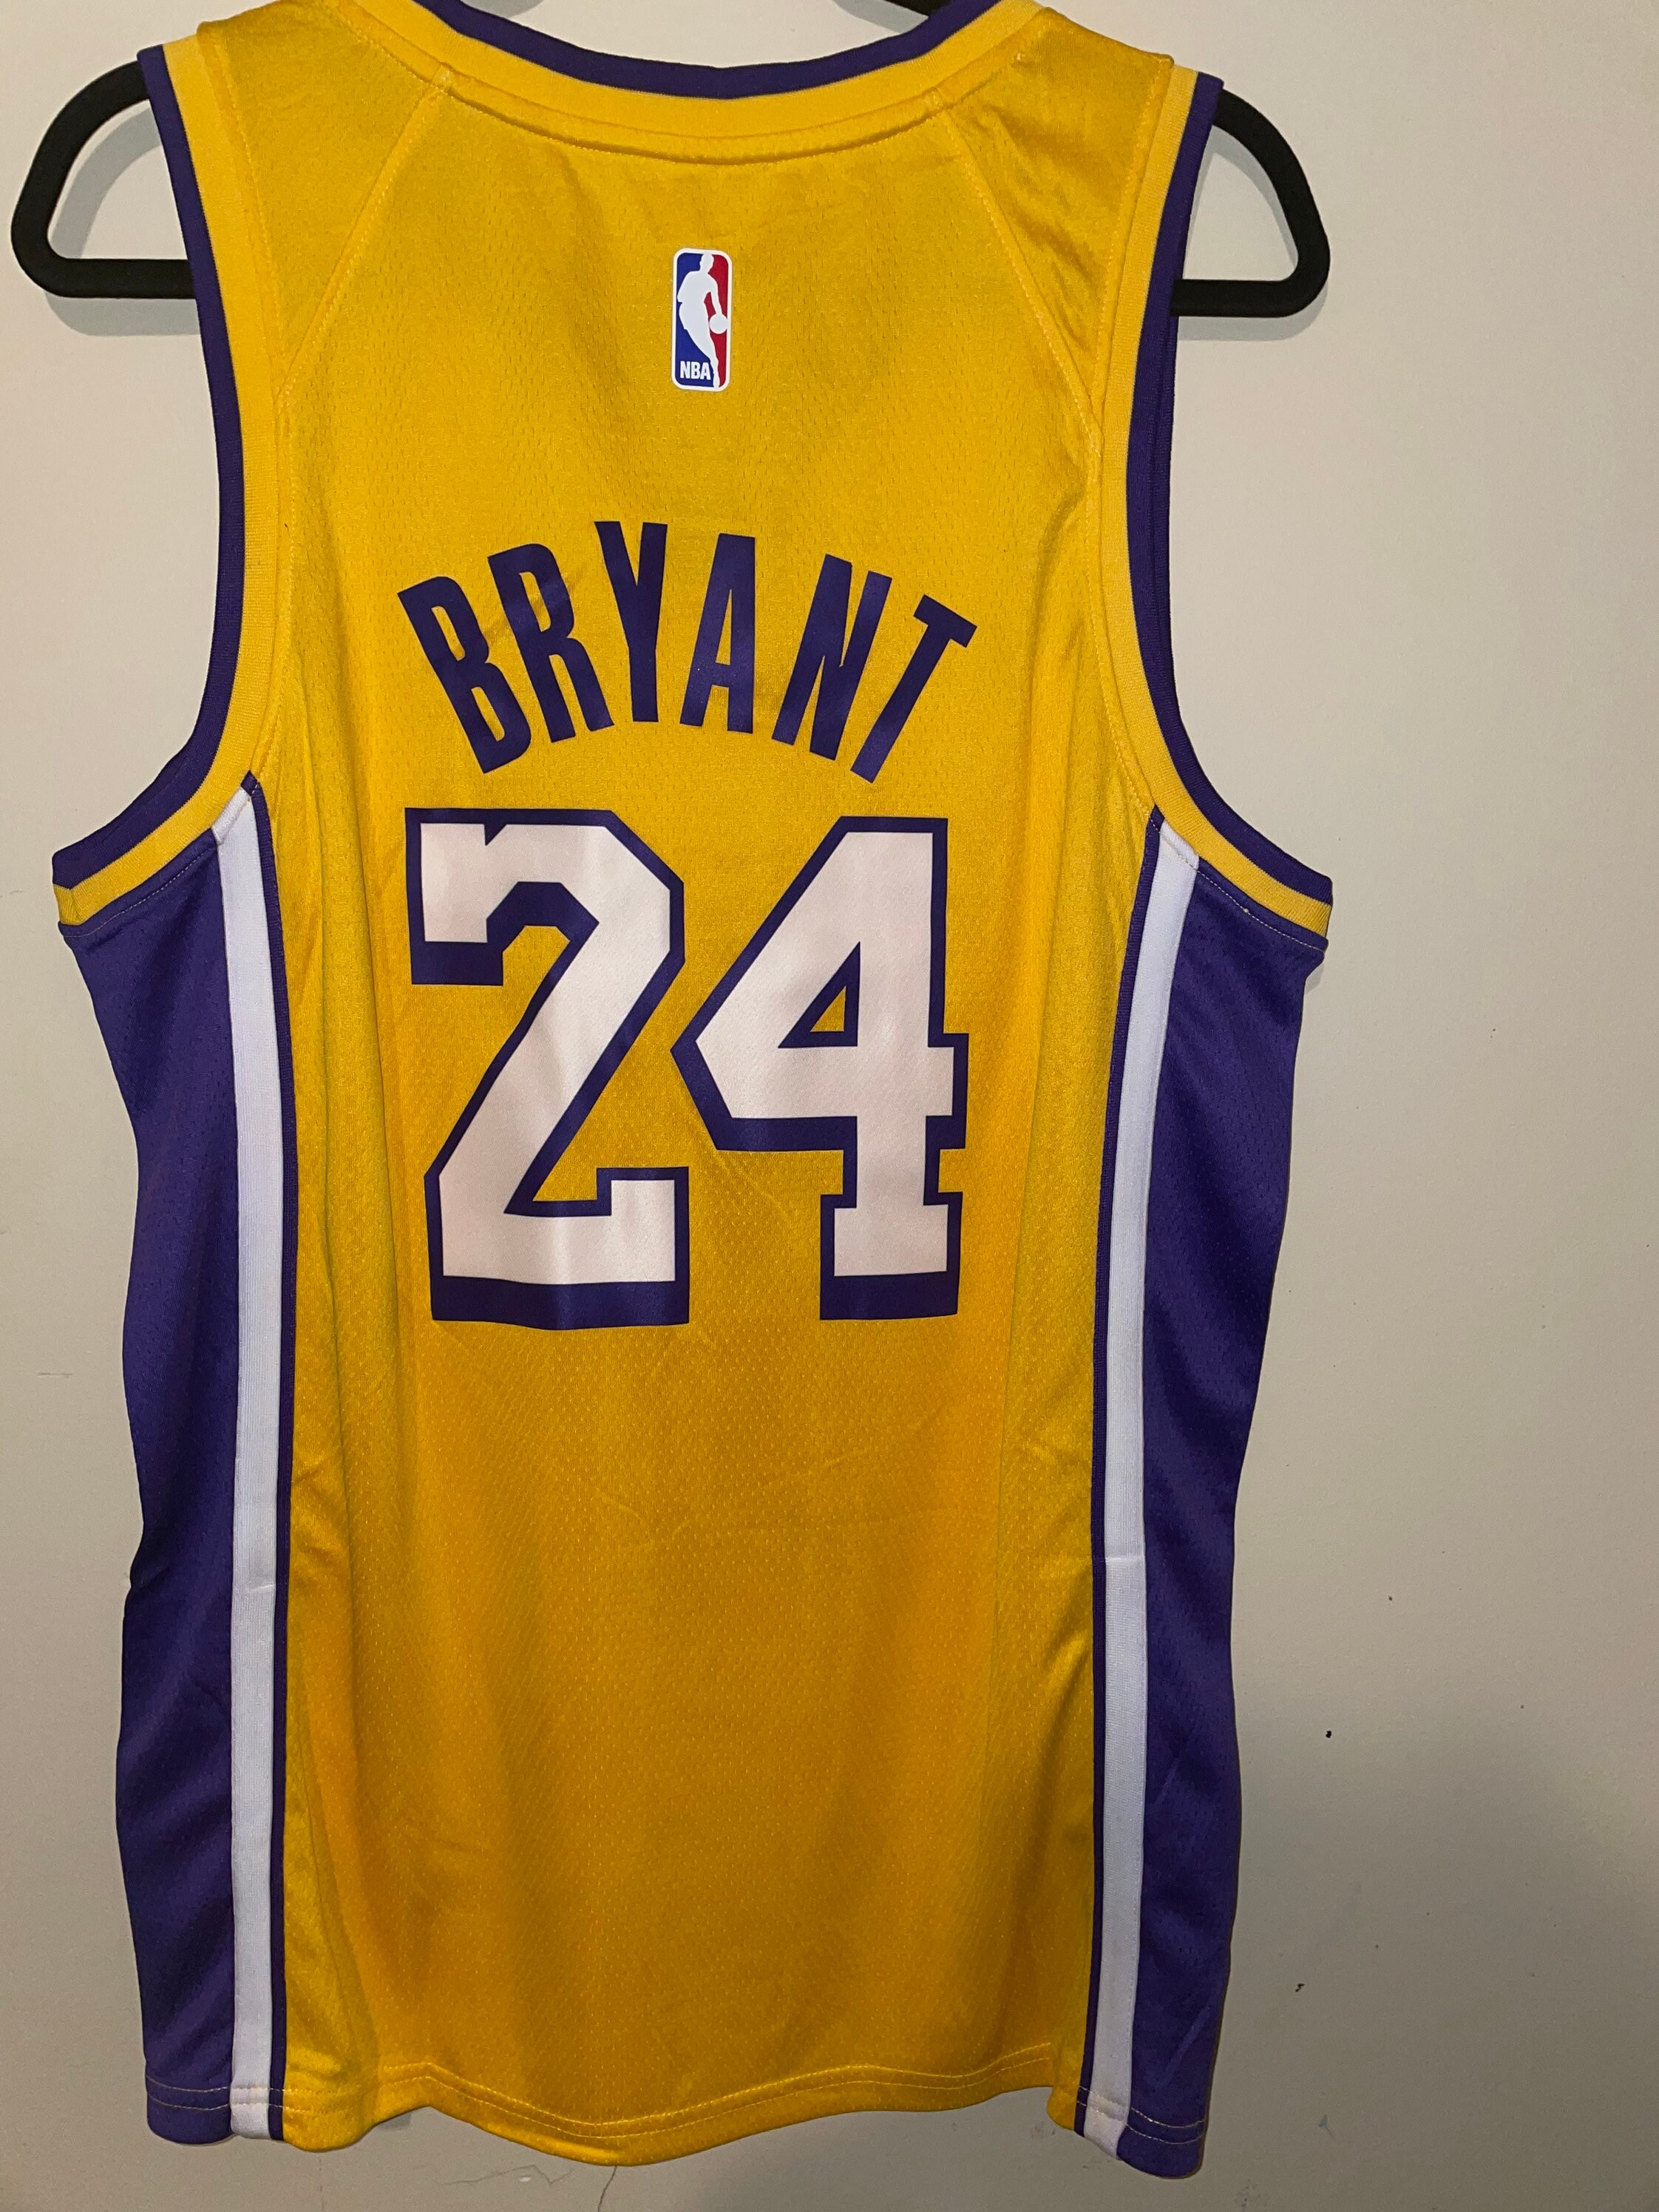 Youth #24 Mamba Jersey Kids #8 Basketball Jersey Hip Hop Clothing for Party Small, 24 Black 